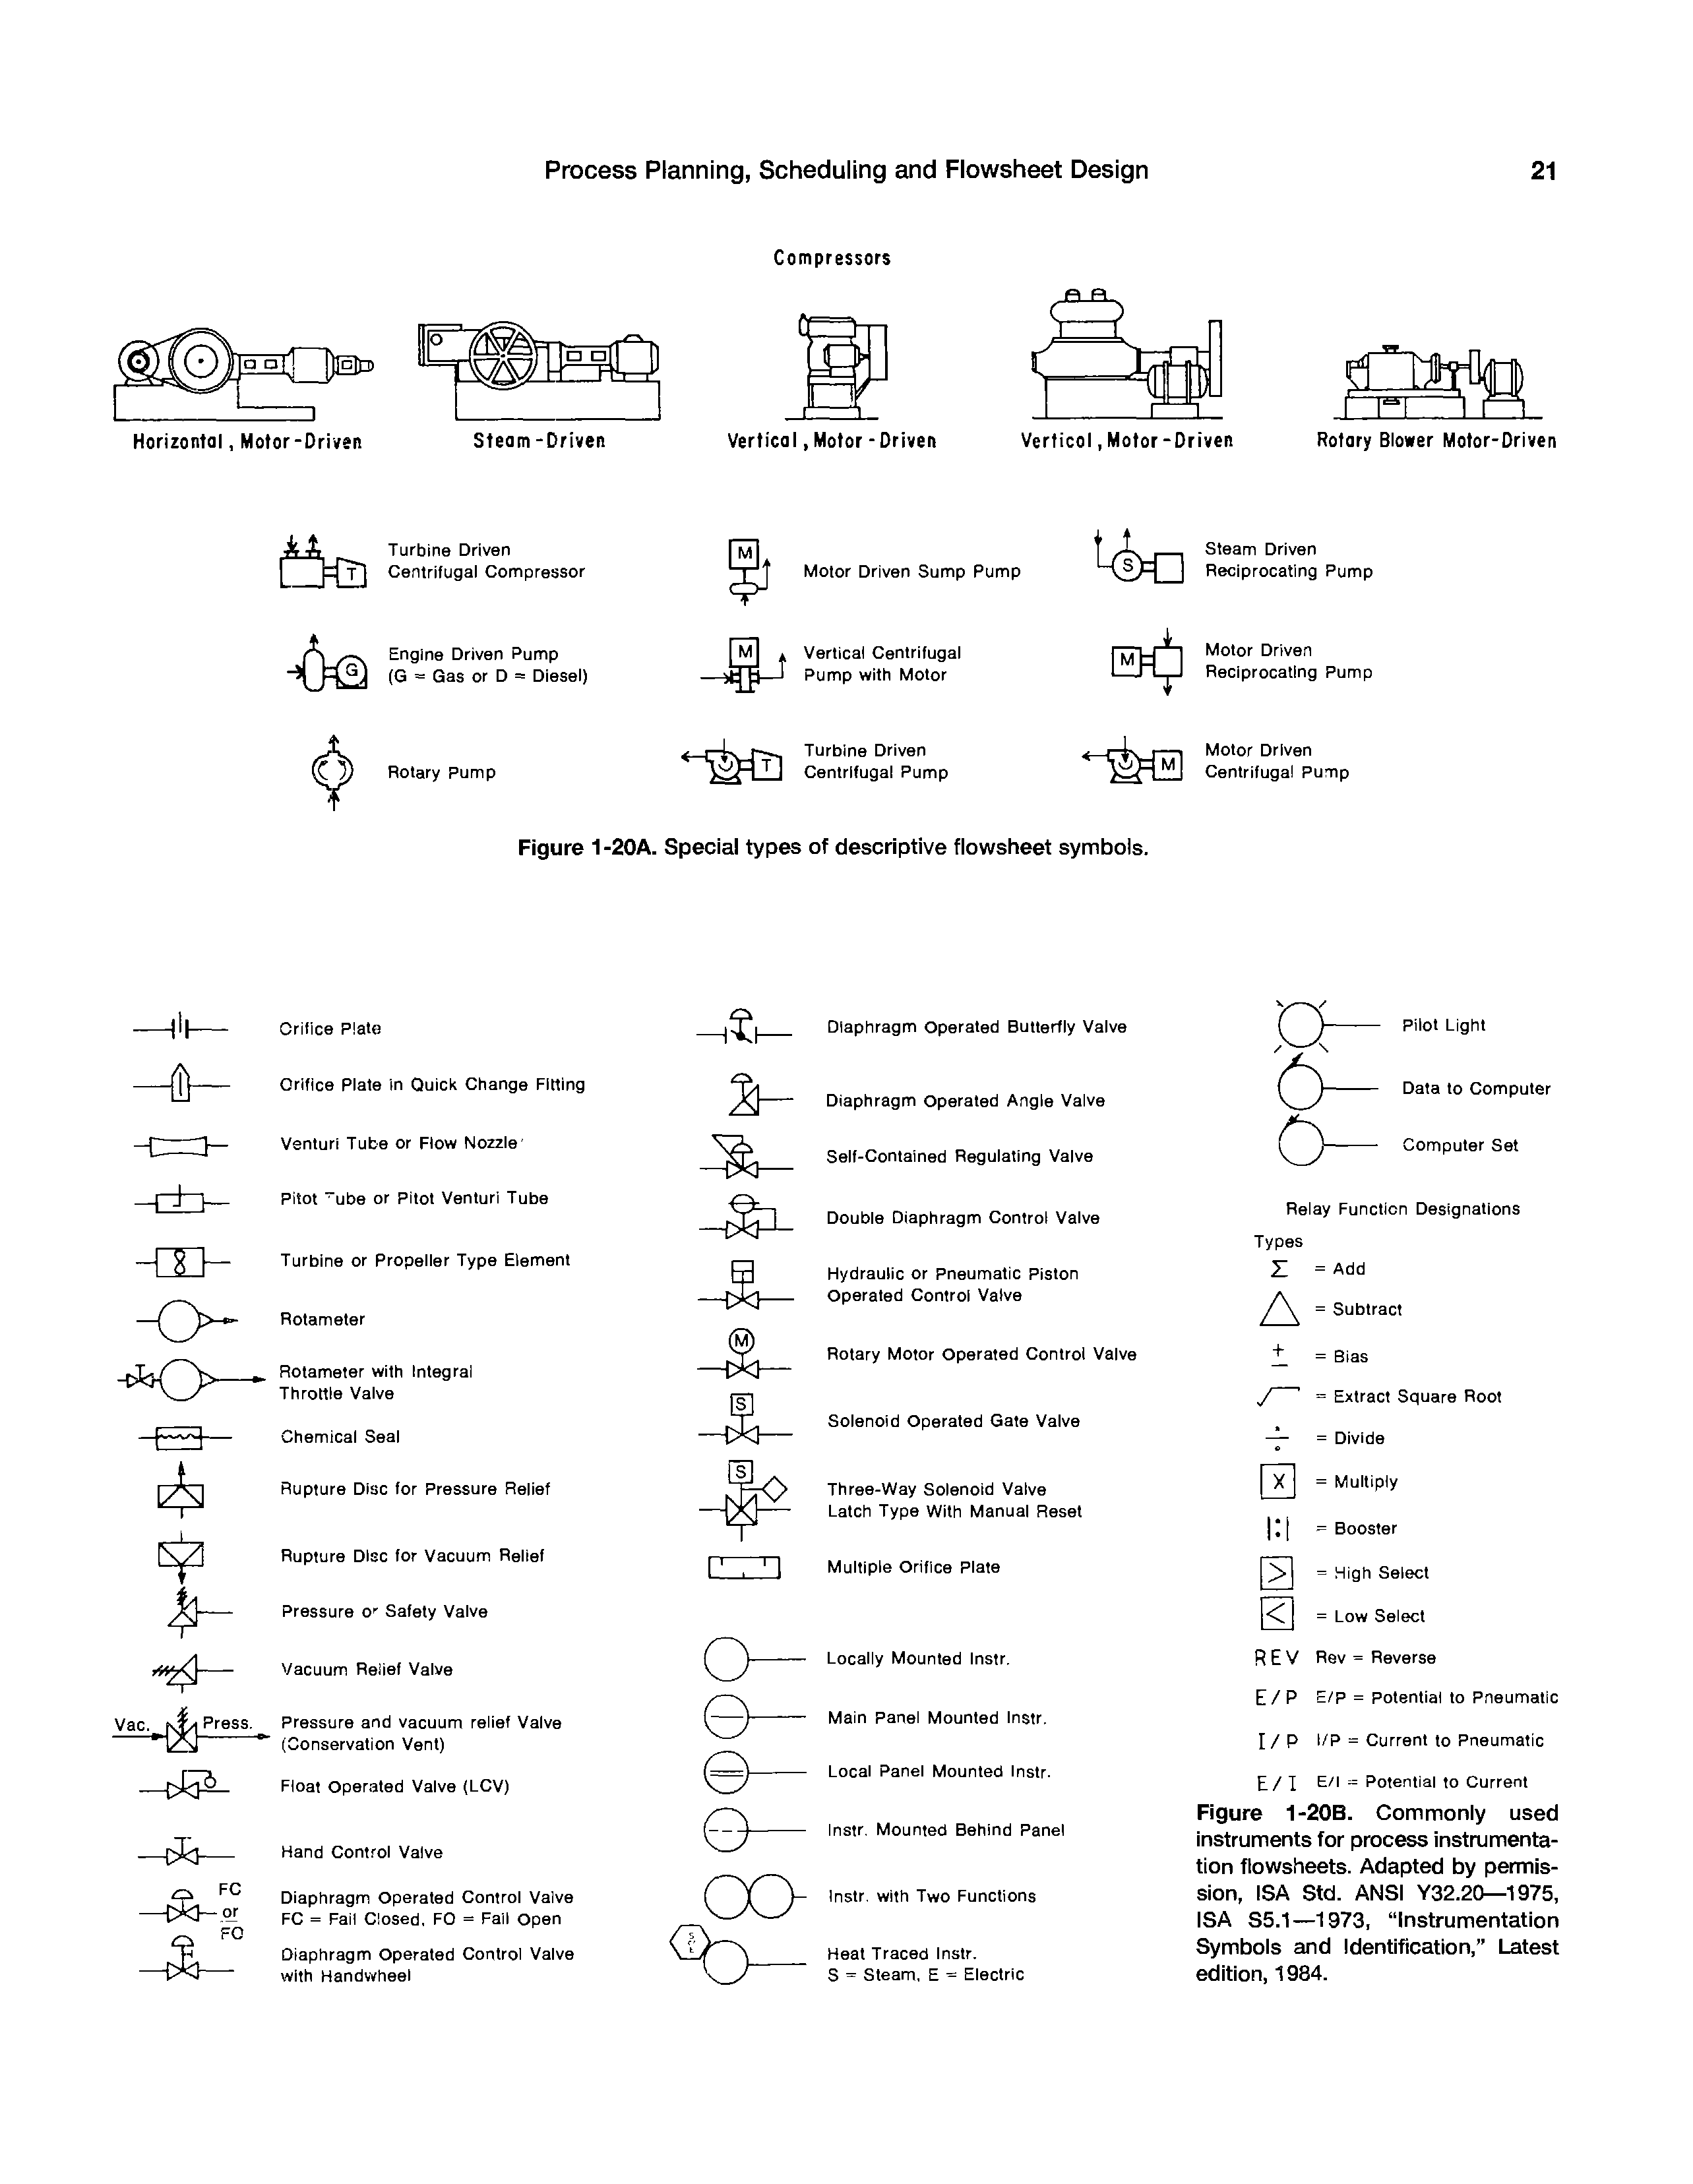 Figure 1-20B. Commonly used instruments for process instrumentation flowsheets. Adapted by permission, ISA Std. ANSI Y32.20—1975, ISA S5.1—1973, Instrumentation Symbols and Identification," Latest edition, 1984.